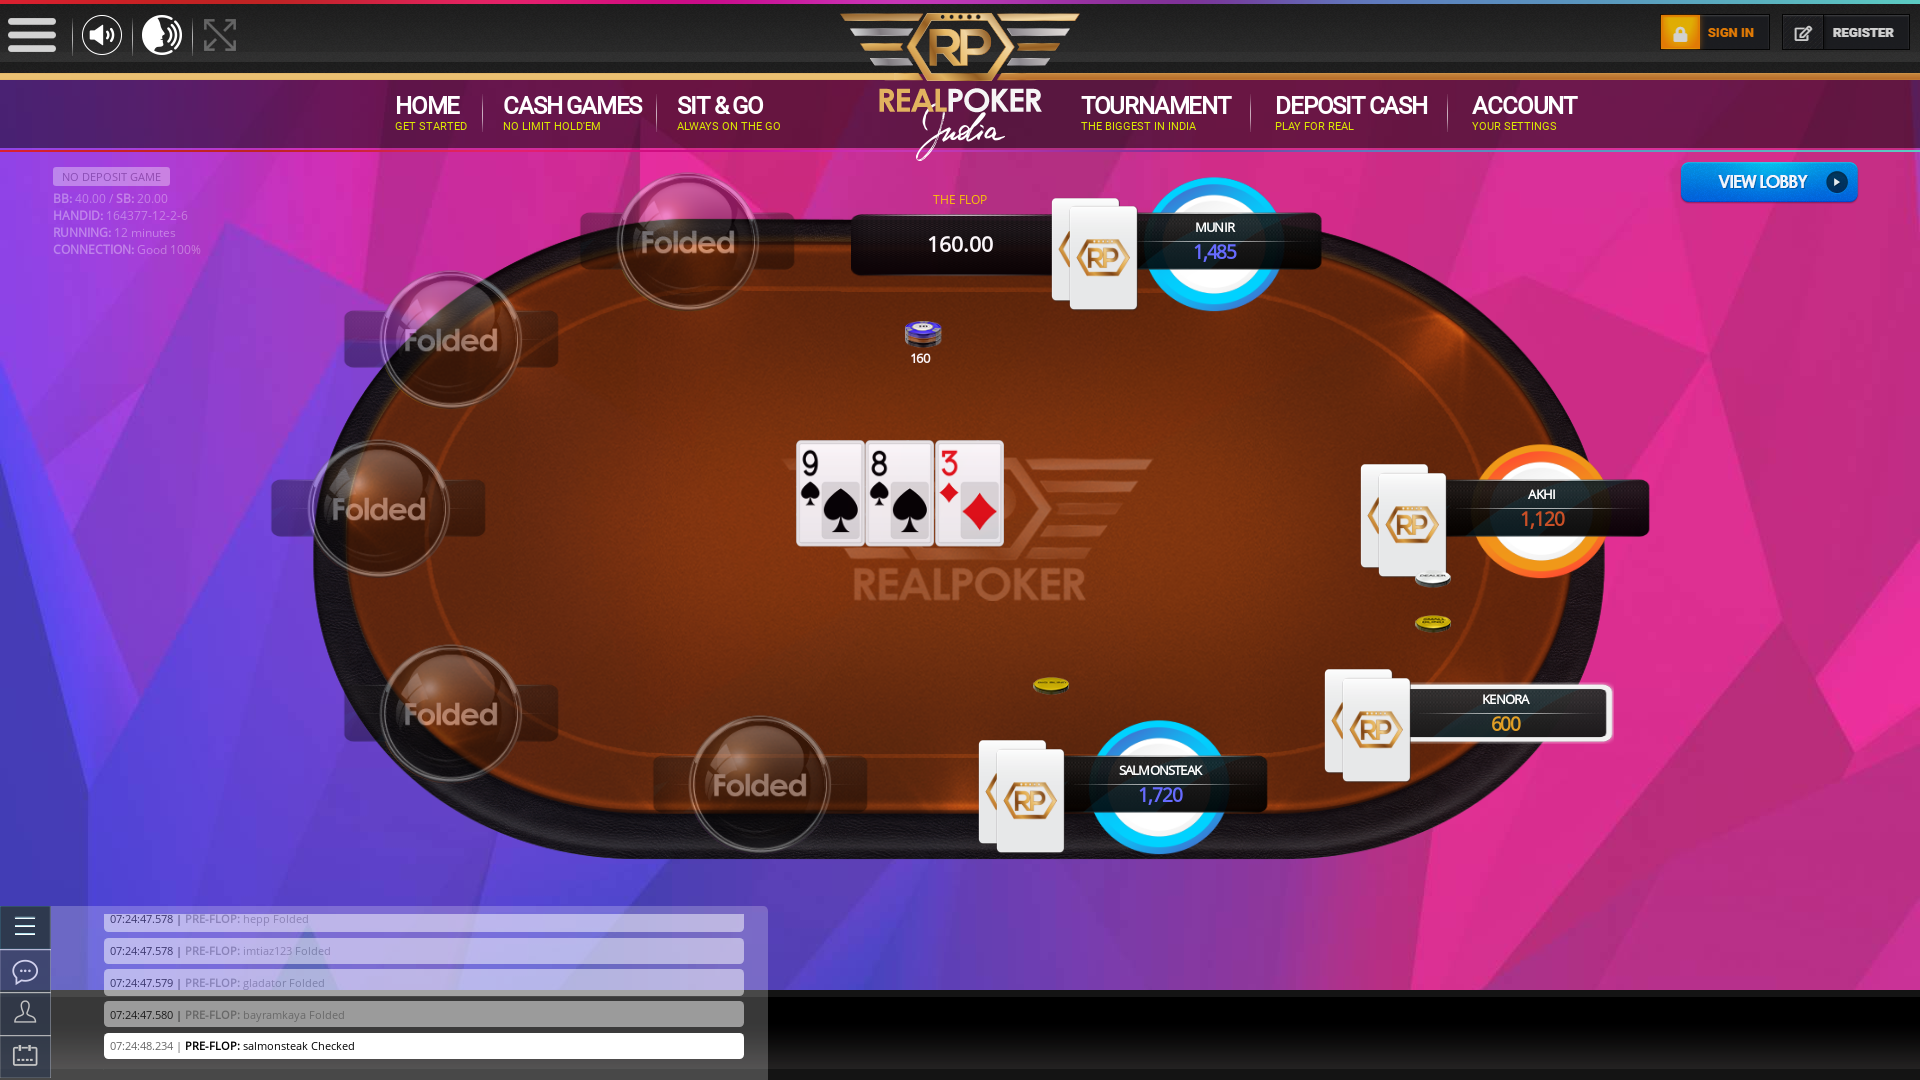 Real Indian poker on a 10 player table in the 12th minute of the game